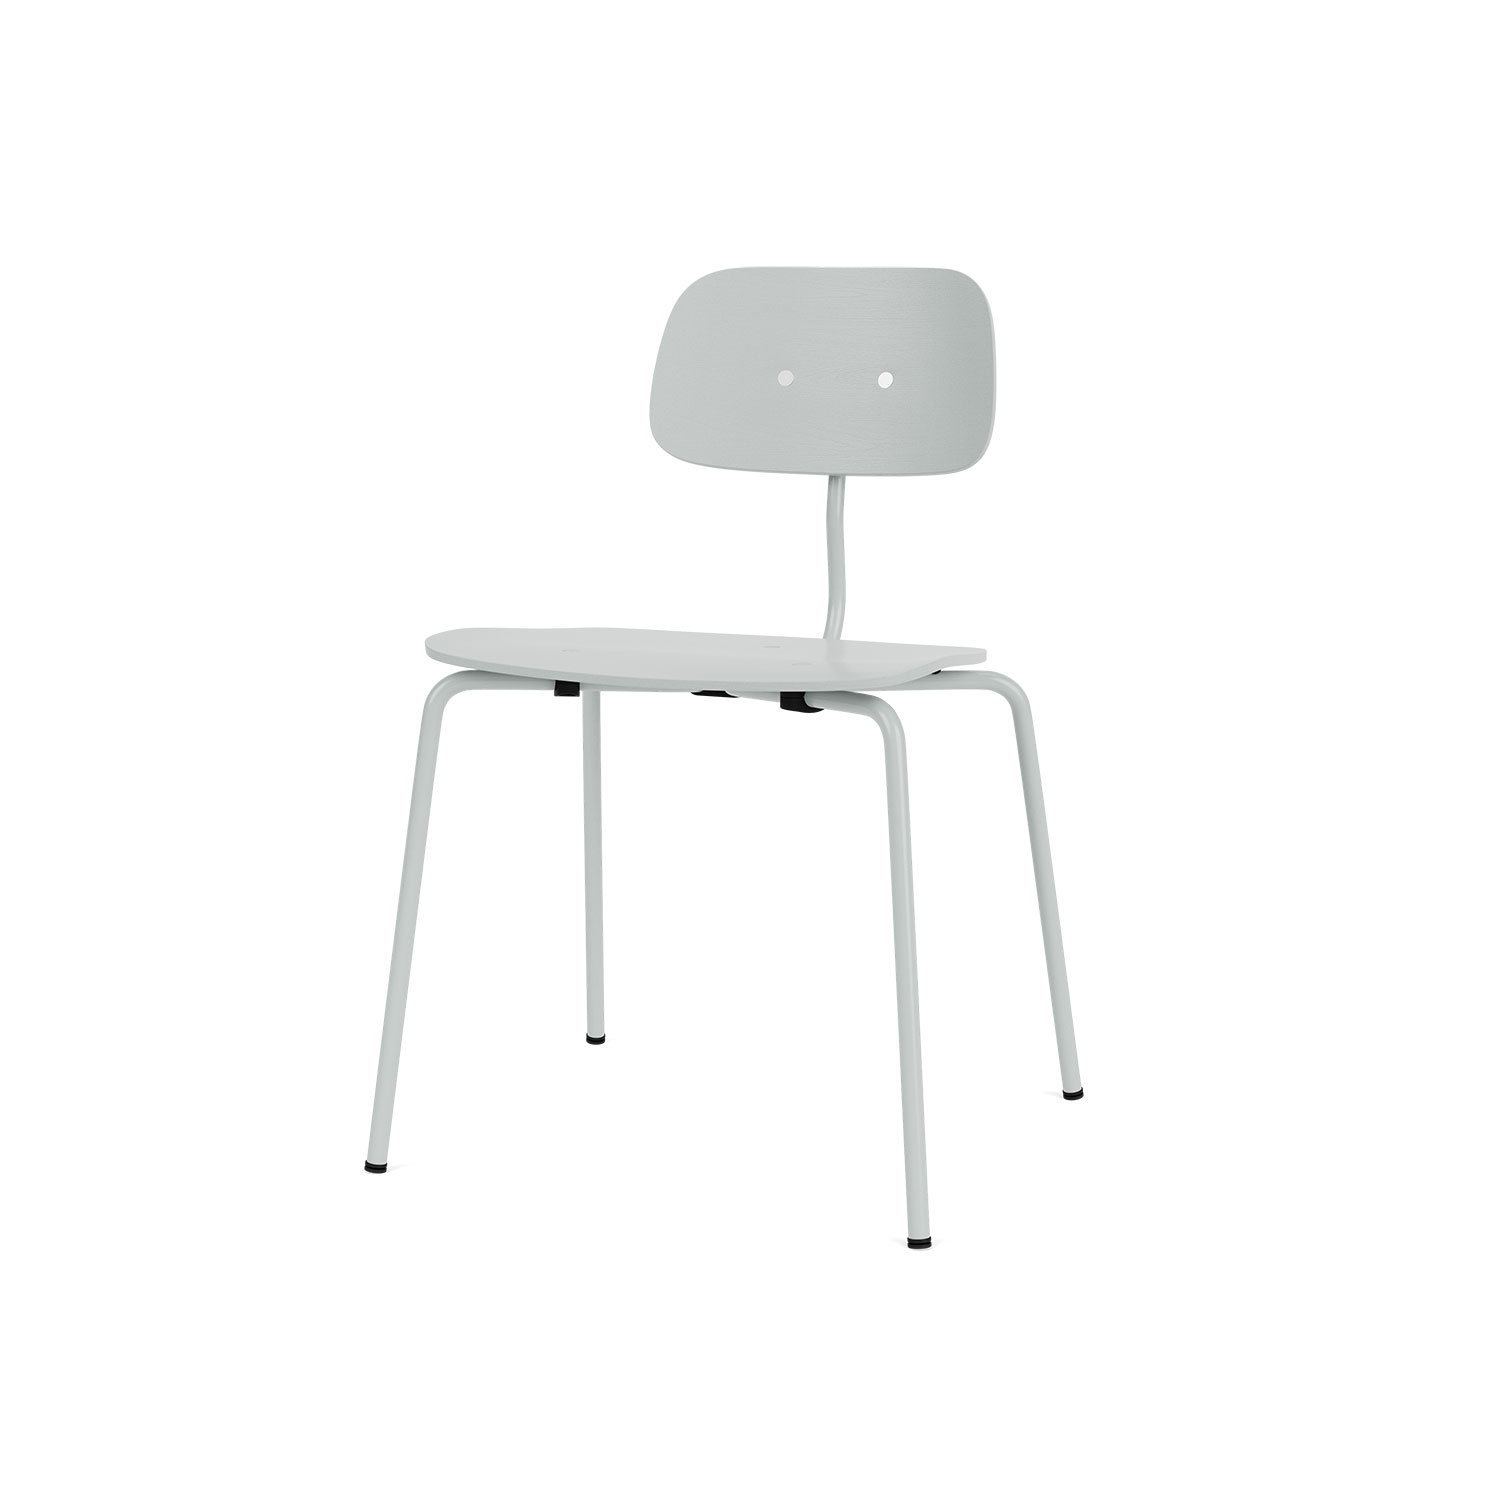 KEVI 2060 chair, Oyster